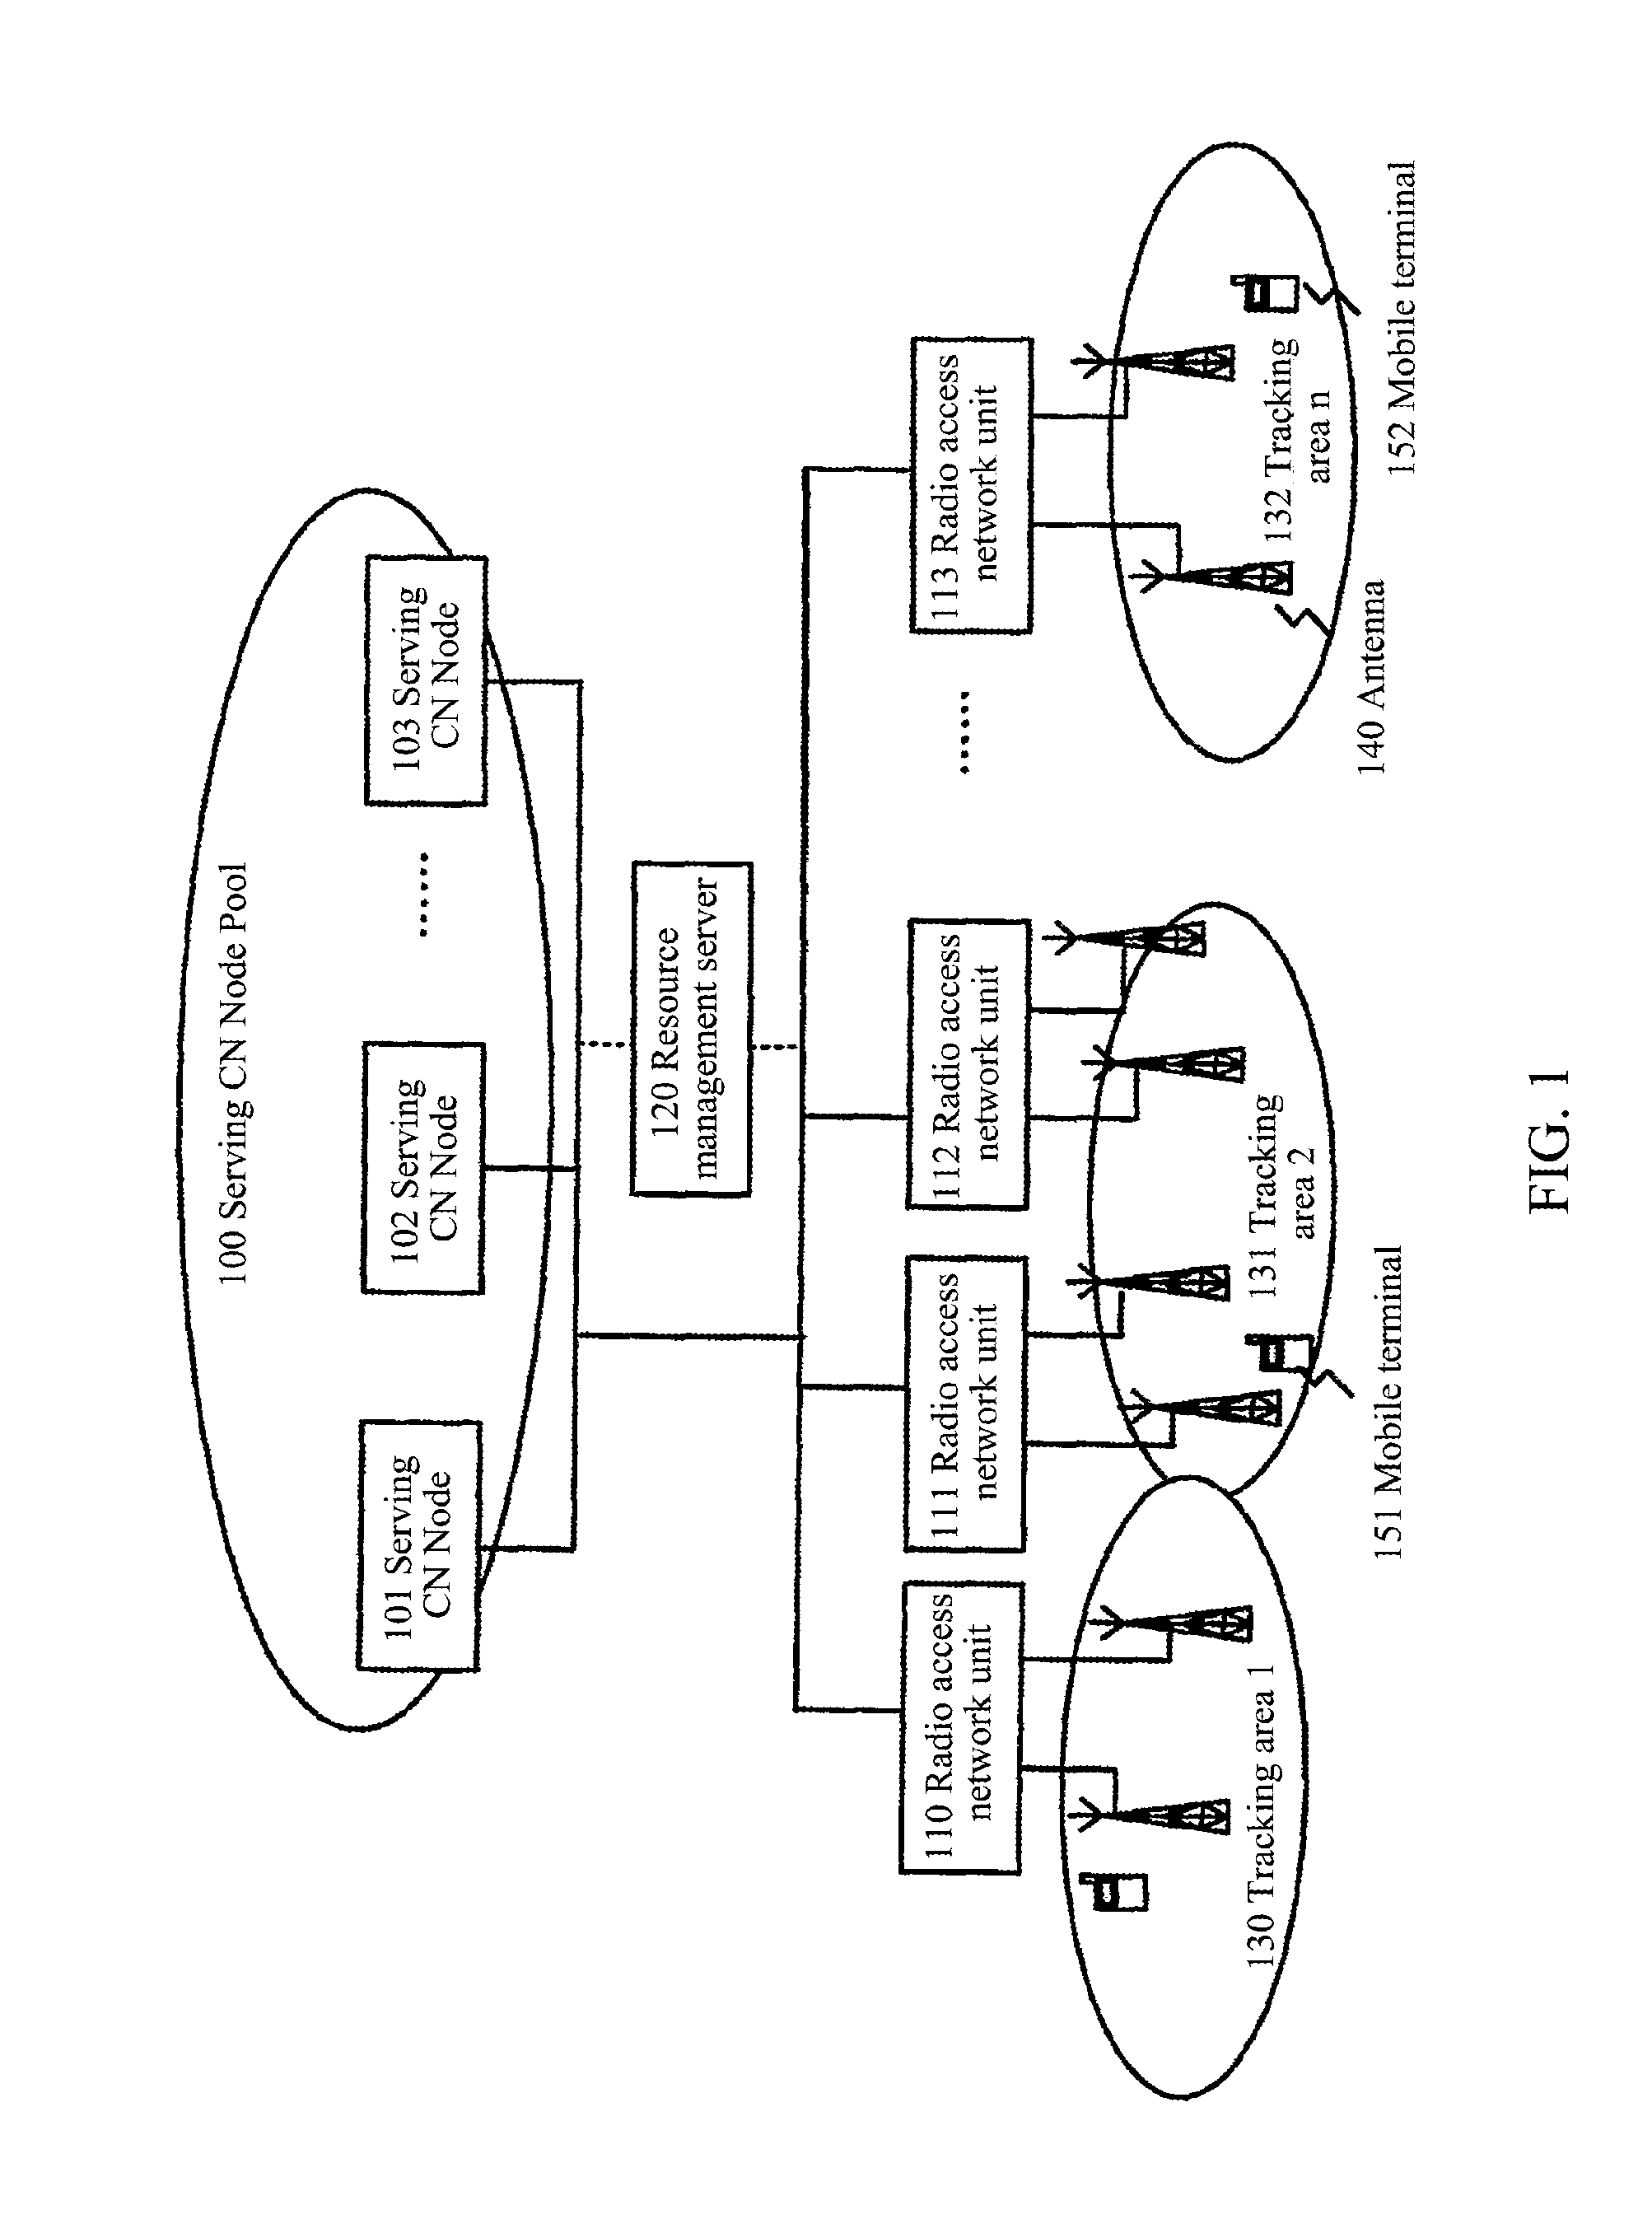 Mobile Terminal Registration Method in a Radio Network